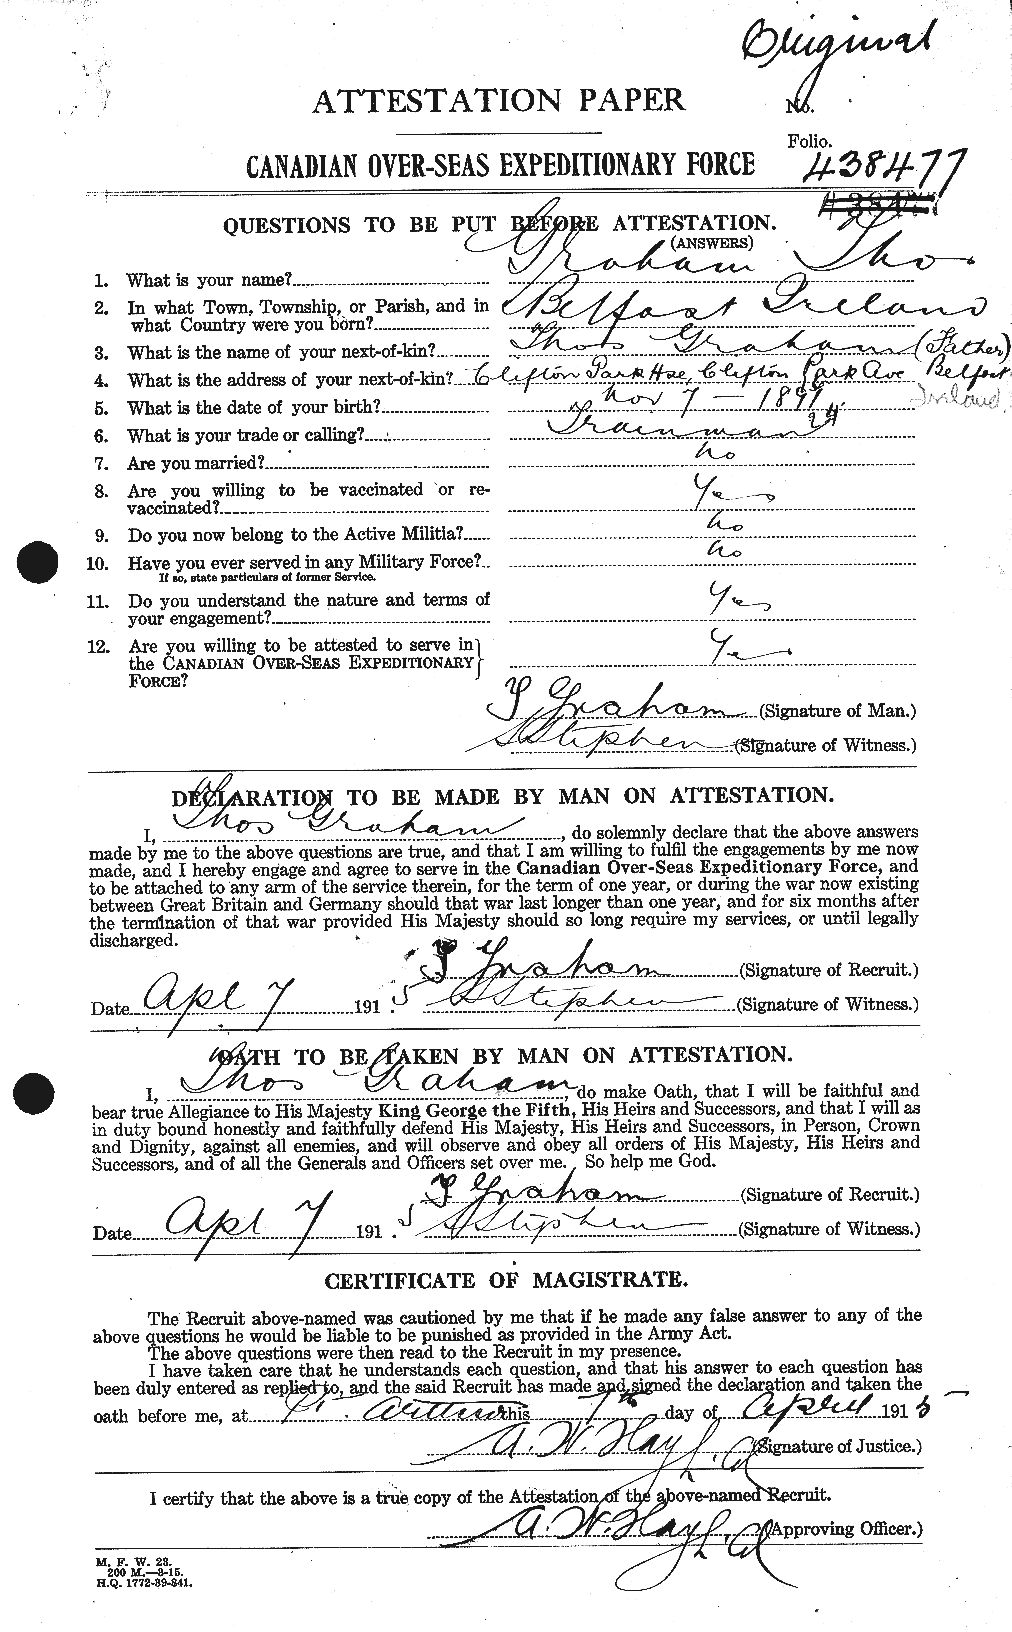 Personnel Records of the First World War - CEF 359483a